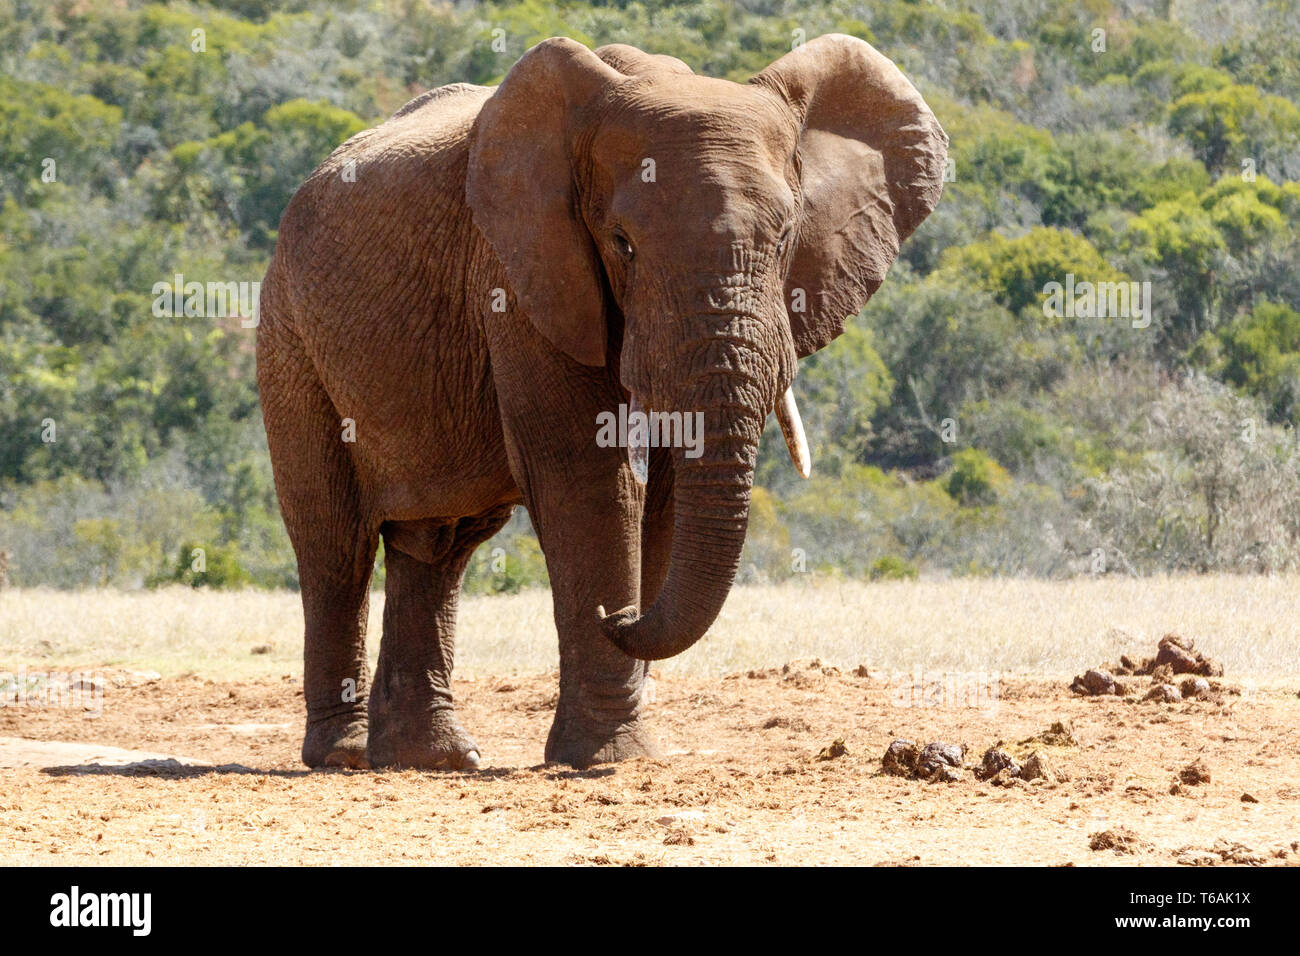 Bush Elephant with flap ears and crossed over legs Stock Photo